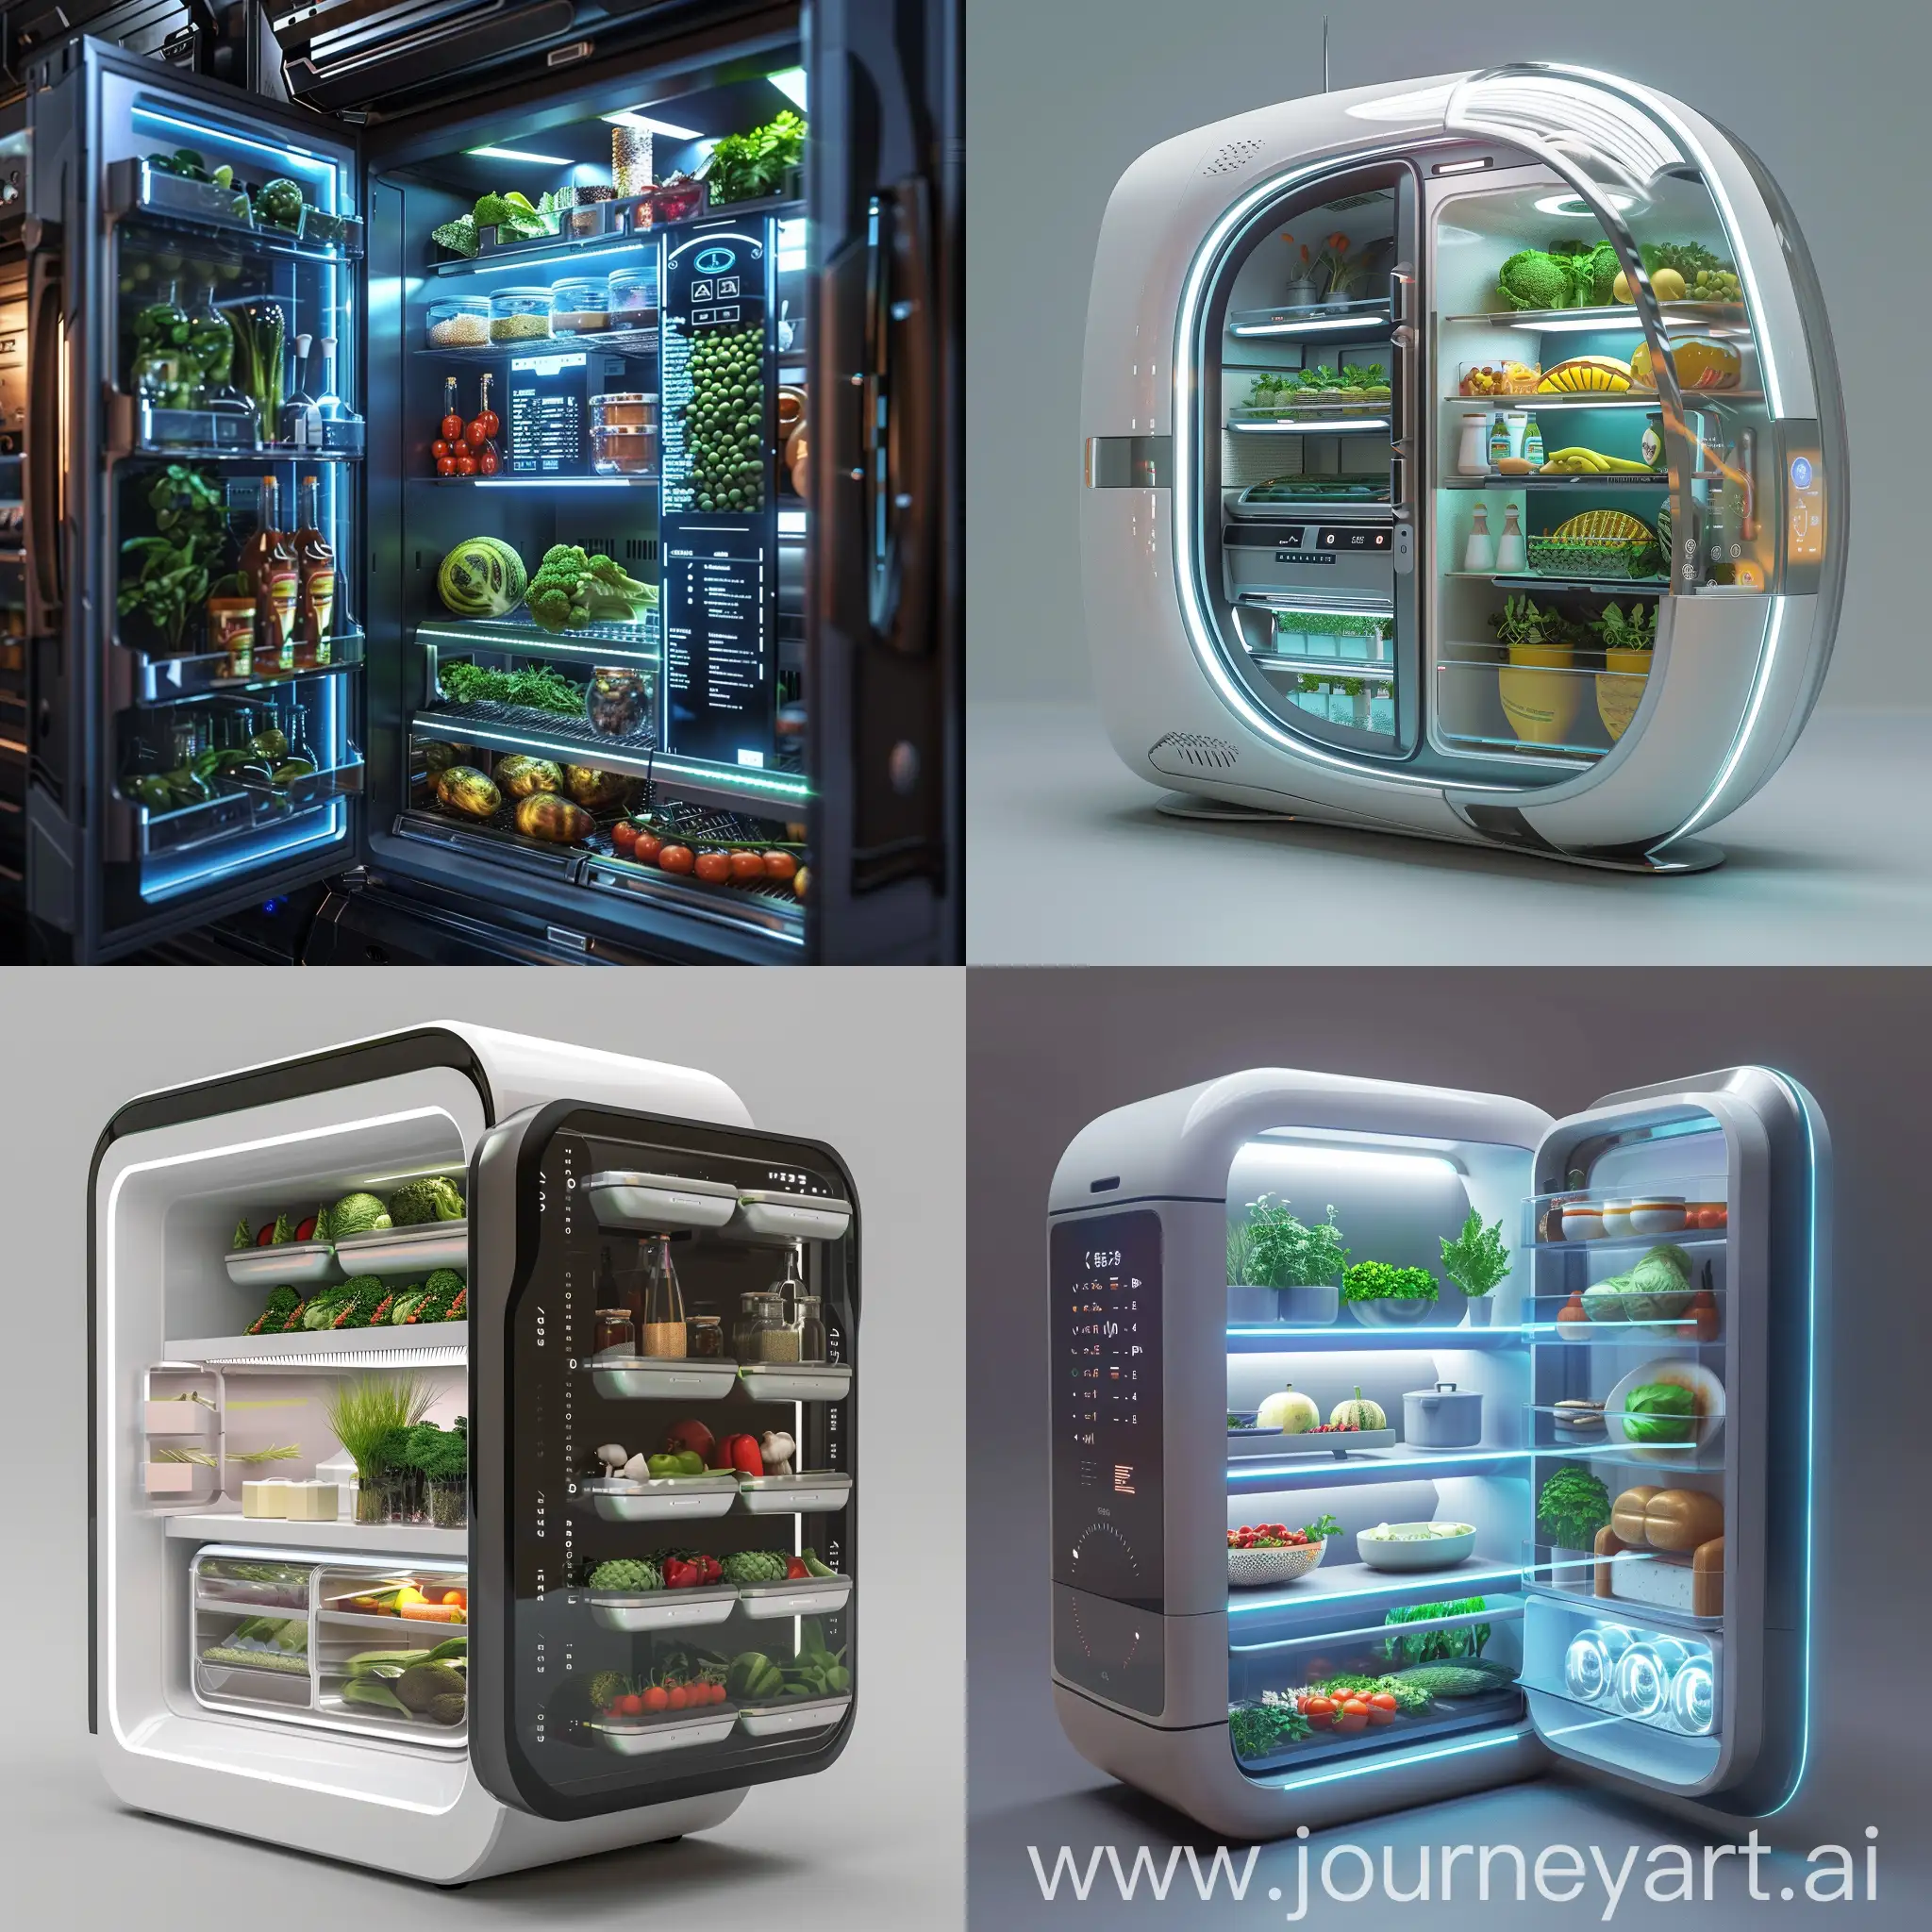 Futuristic-Fridge-with-Robotic-Chef-Assistant-and-Personalized-Nutrition